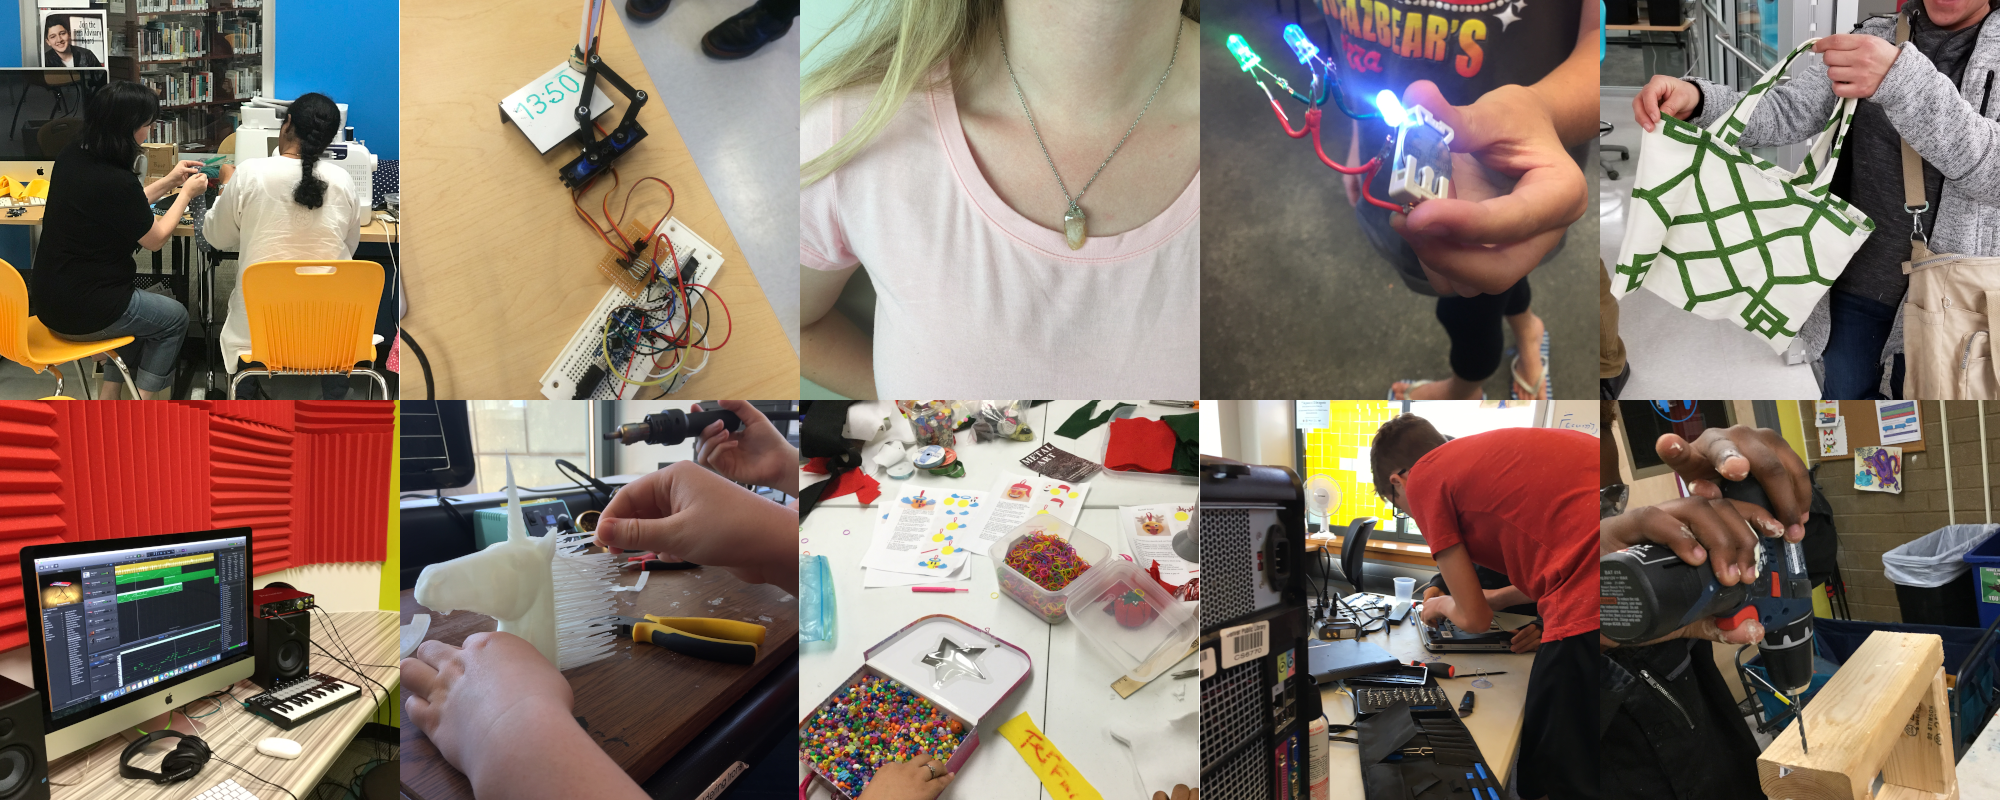 Examples of projects done in ideaLABs across Denver: sewing, repairs, 3D printing, beading, and more.